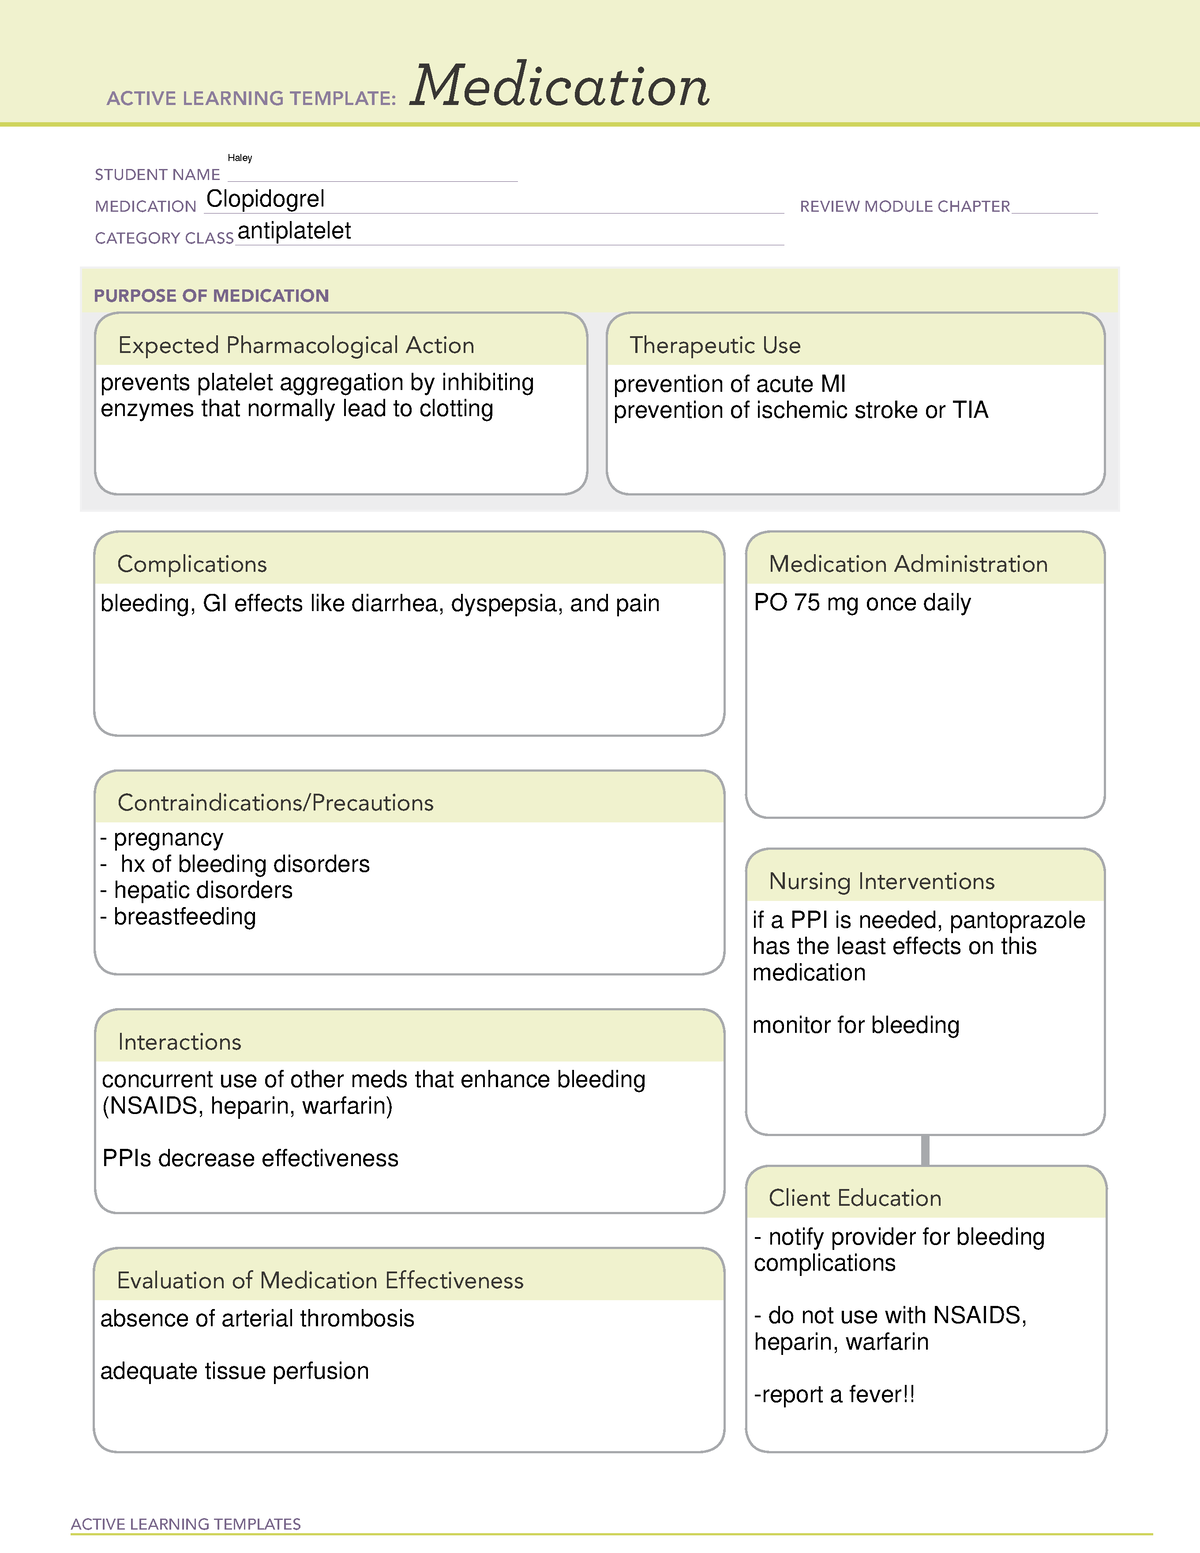 Clopidogrel medication template ACTIVE LEARNING TEMPLATES Medication